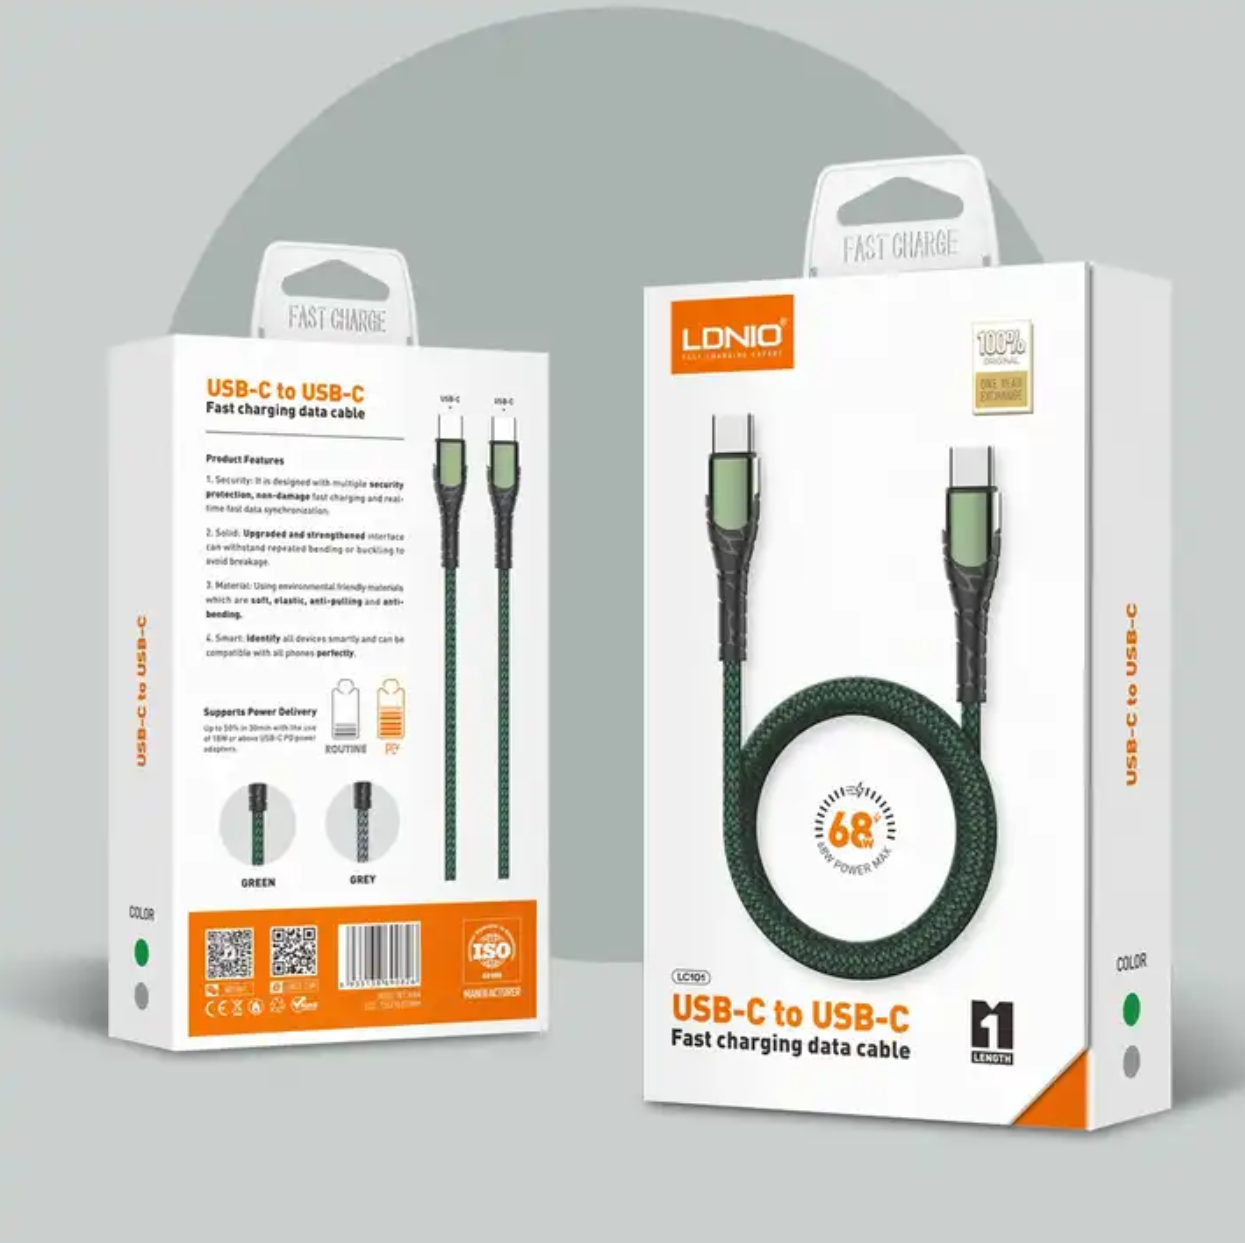 LDNIO ultra strong fast charging cable | data cable | PD 65W | 480Mbps | USB-C to USB-C | 2M